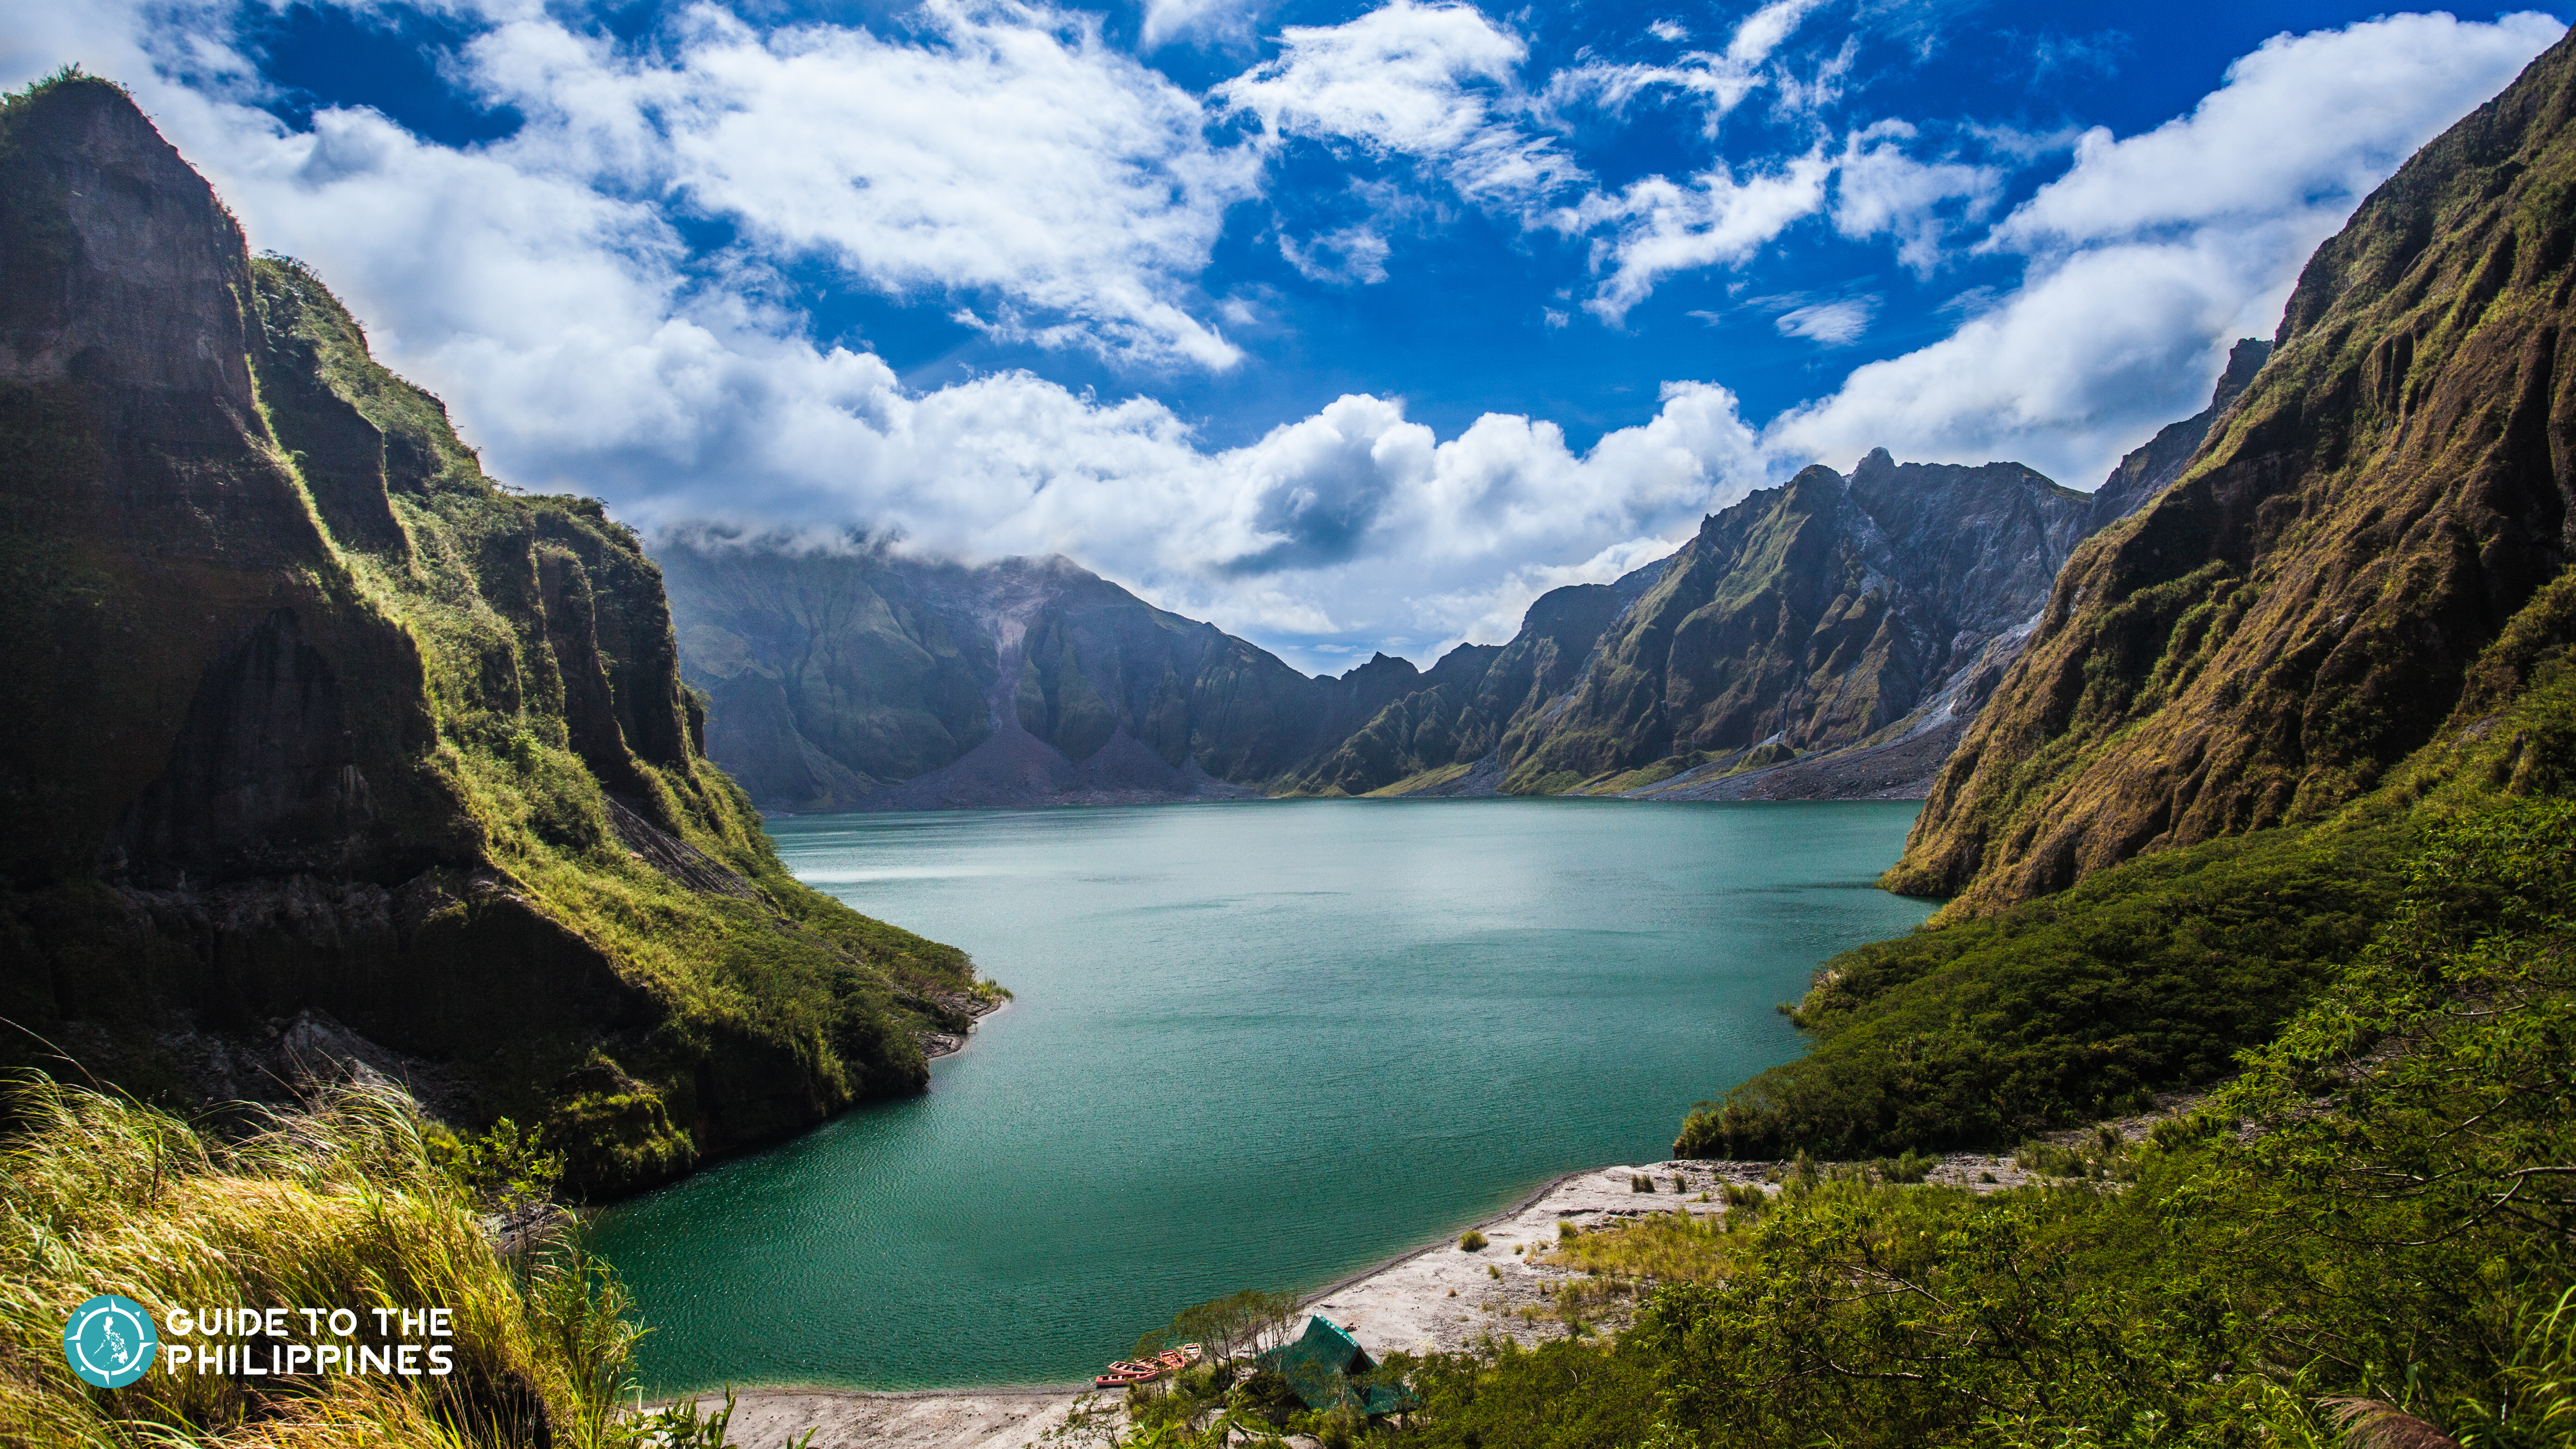 View of the Mount Pinatubo Crater Lake